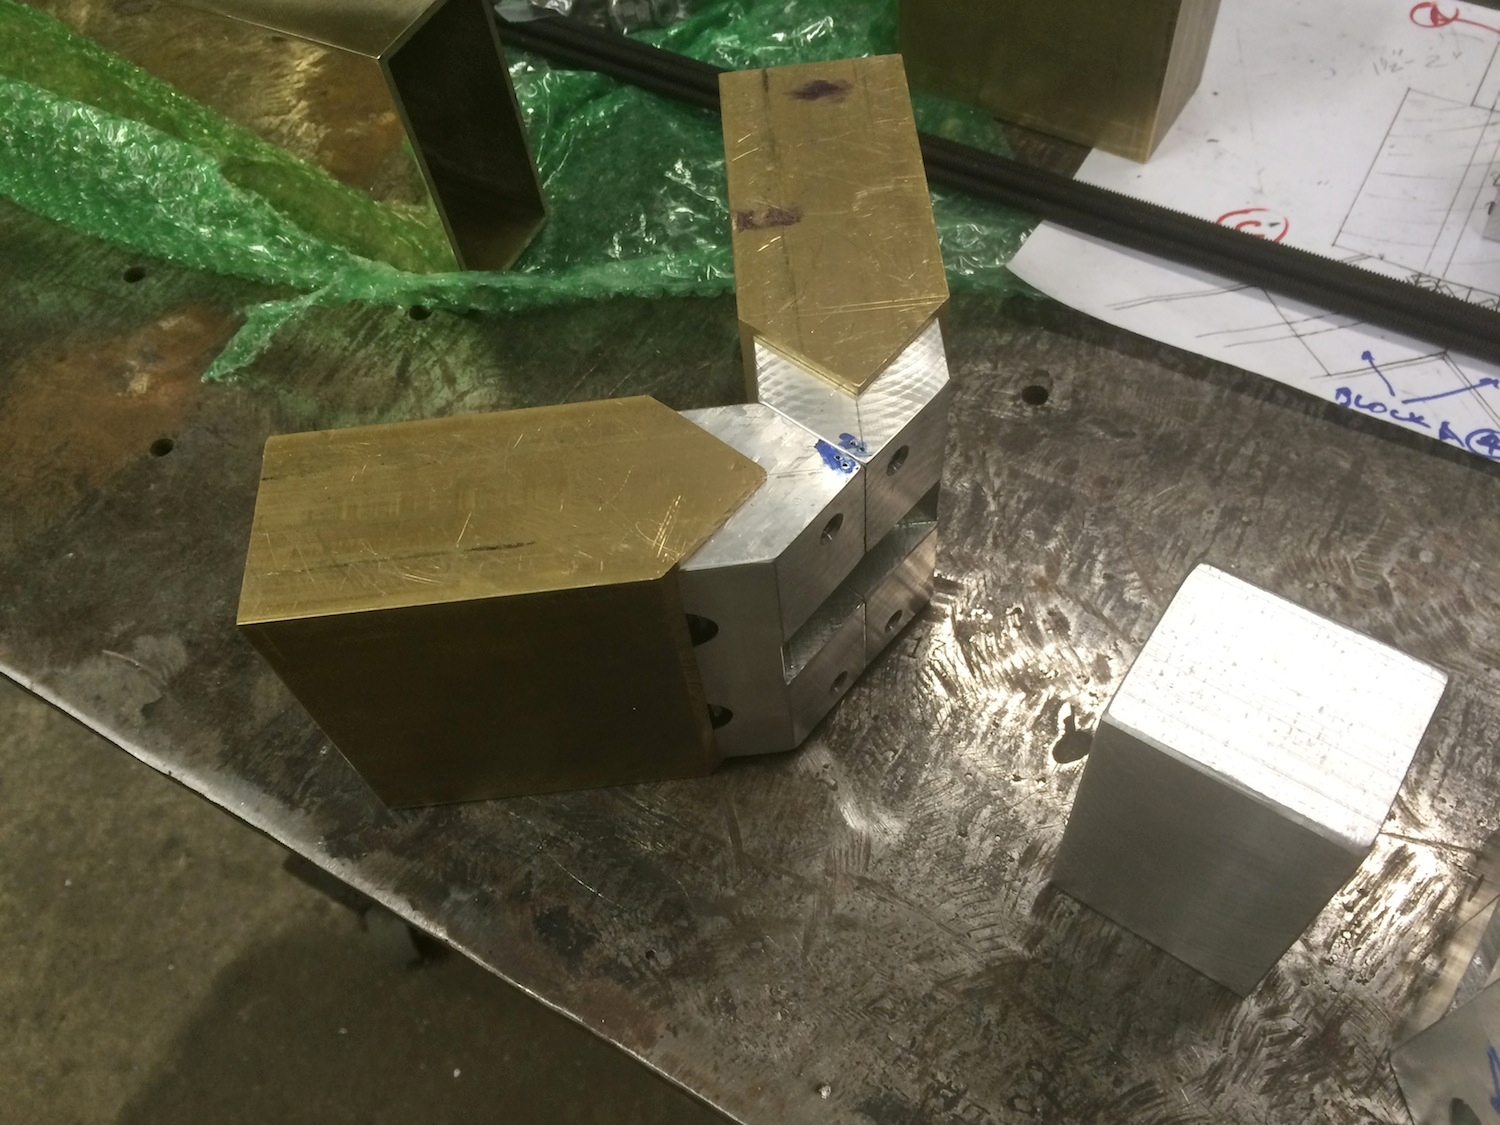   Testing the fit of the aluminum blocks that join the brass tubing at the miter and to the wood.  